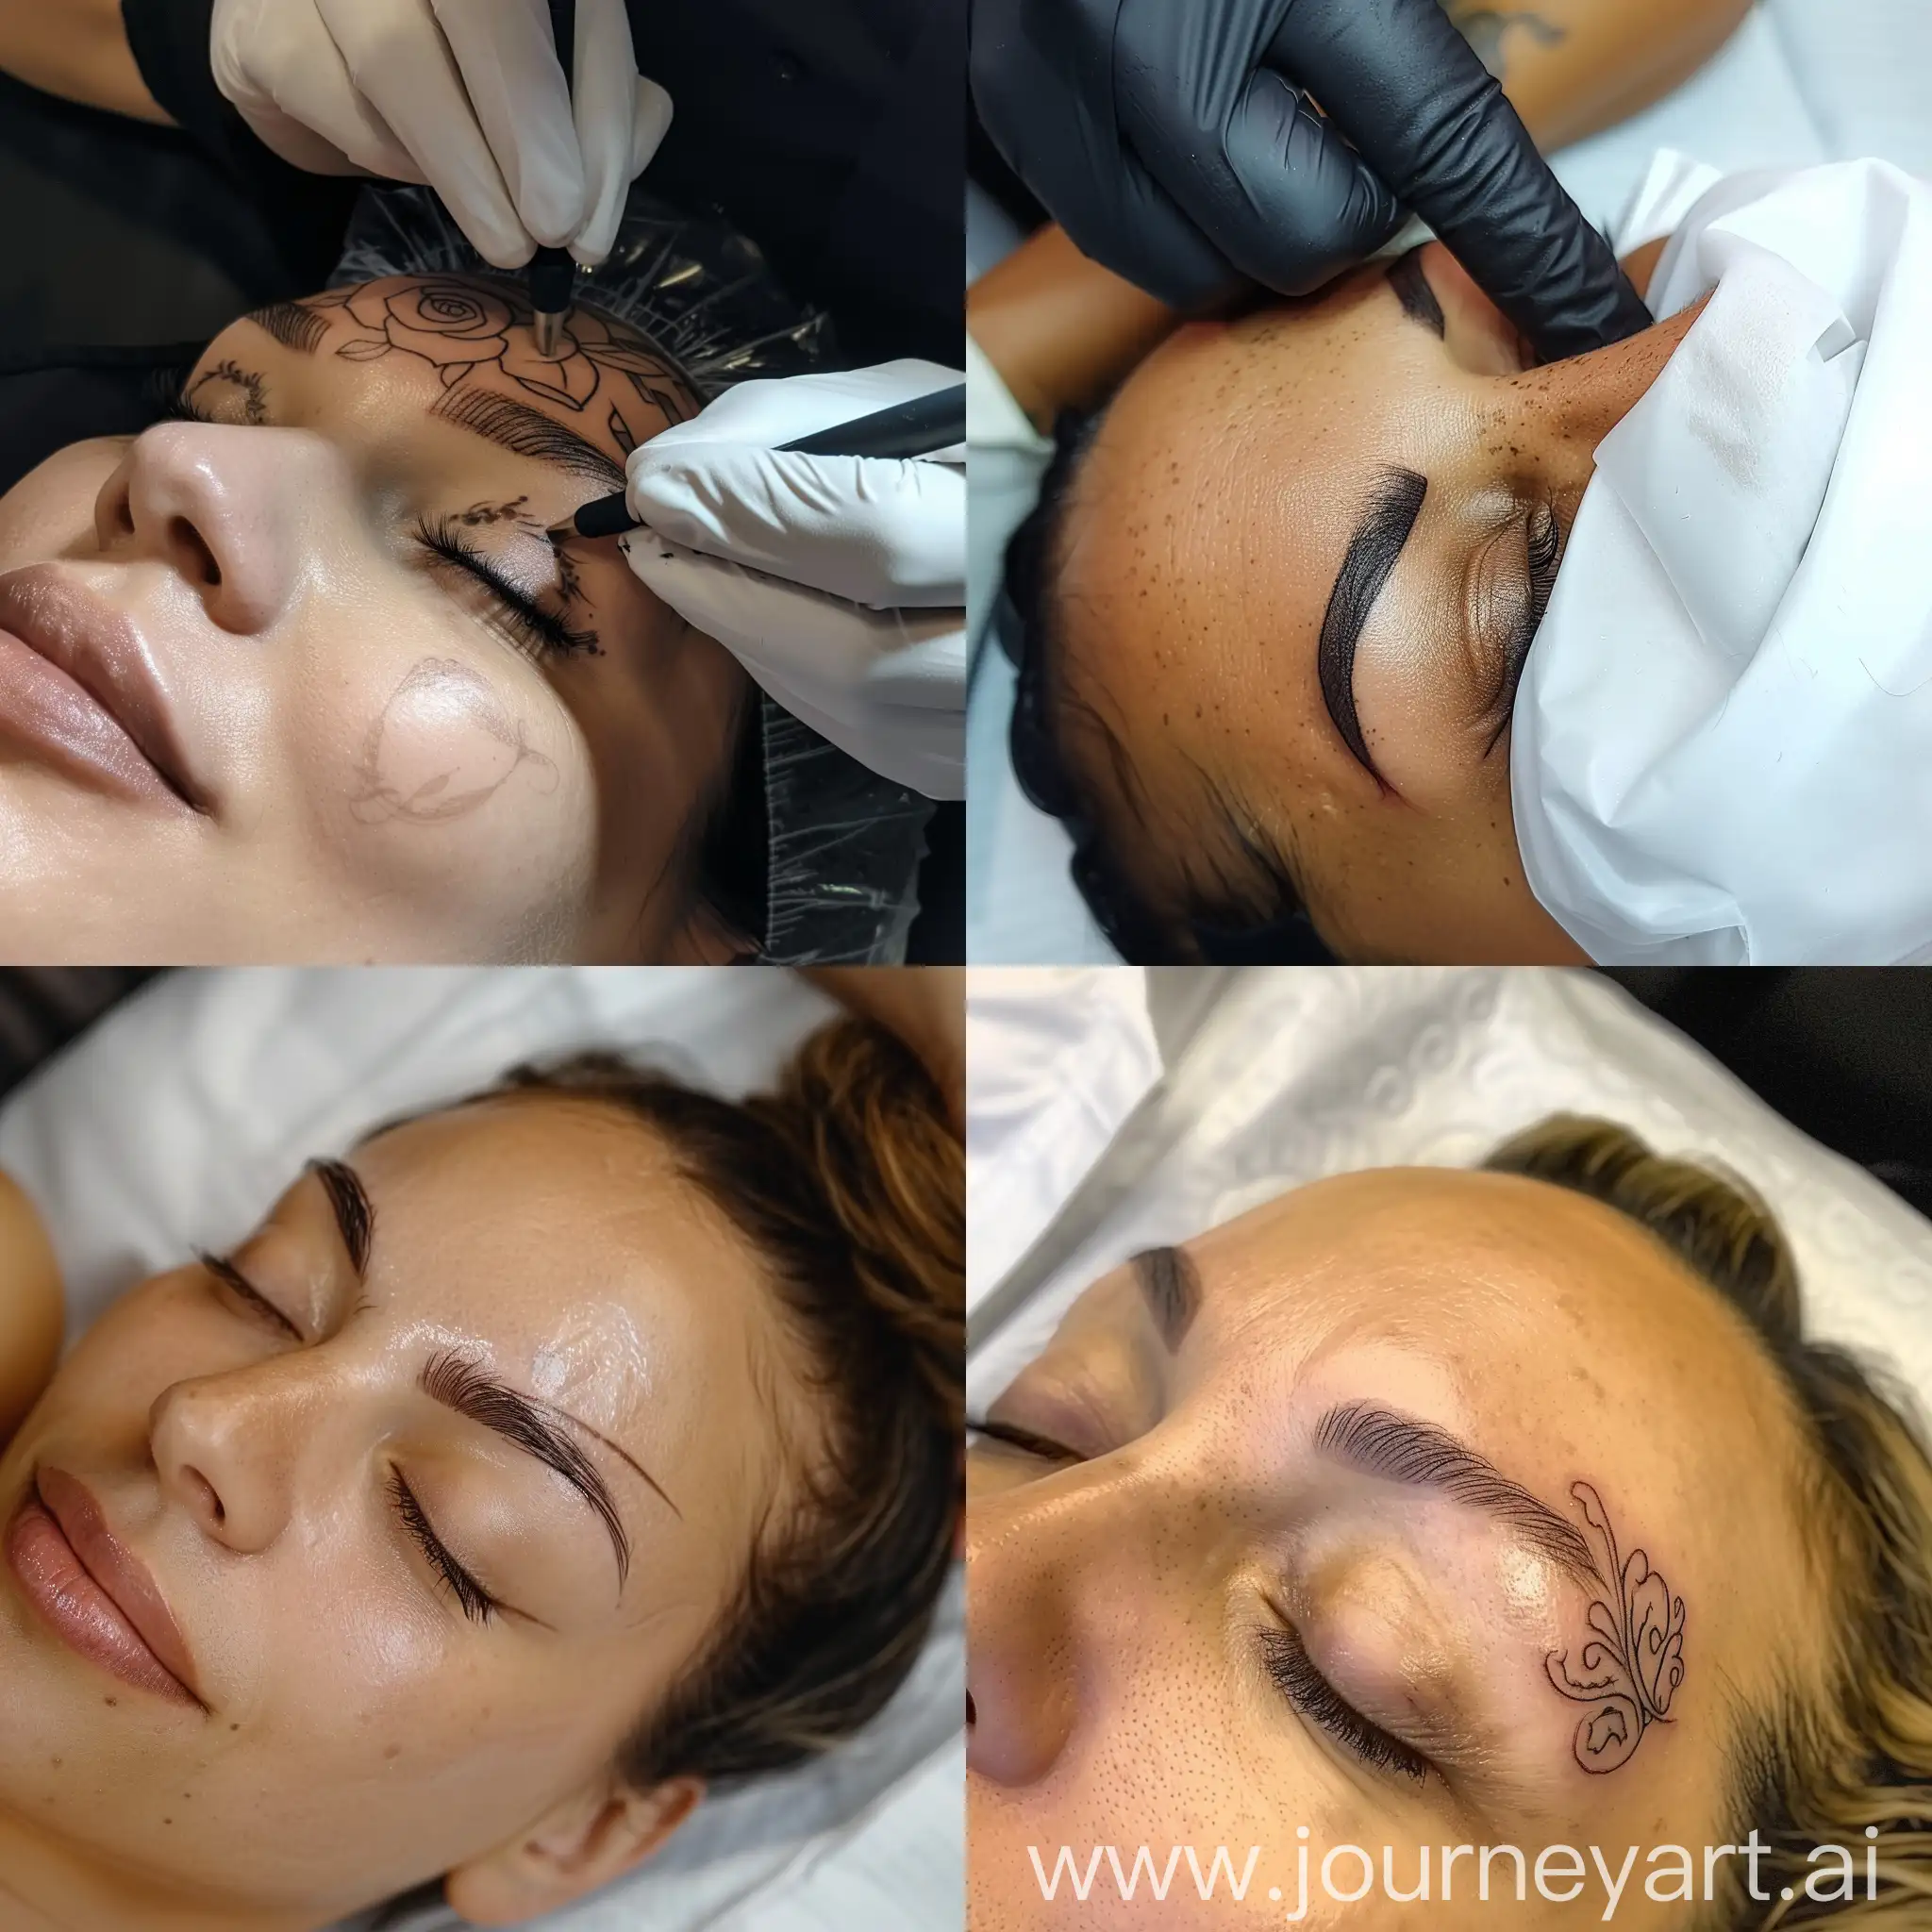 Timeless-Elegance-Permanent-Makeup-Tattoo-Featuring-Exquisite-Eyebrows-Lip-and-Eyelid-Emblem